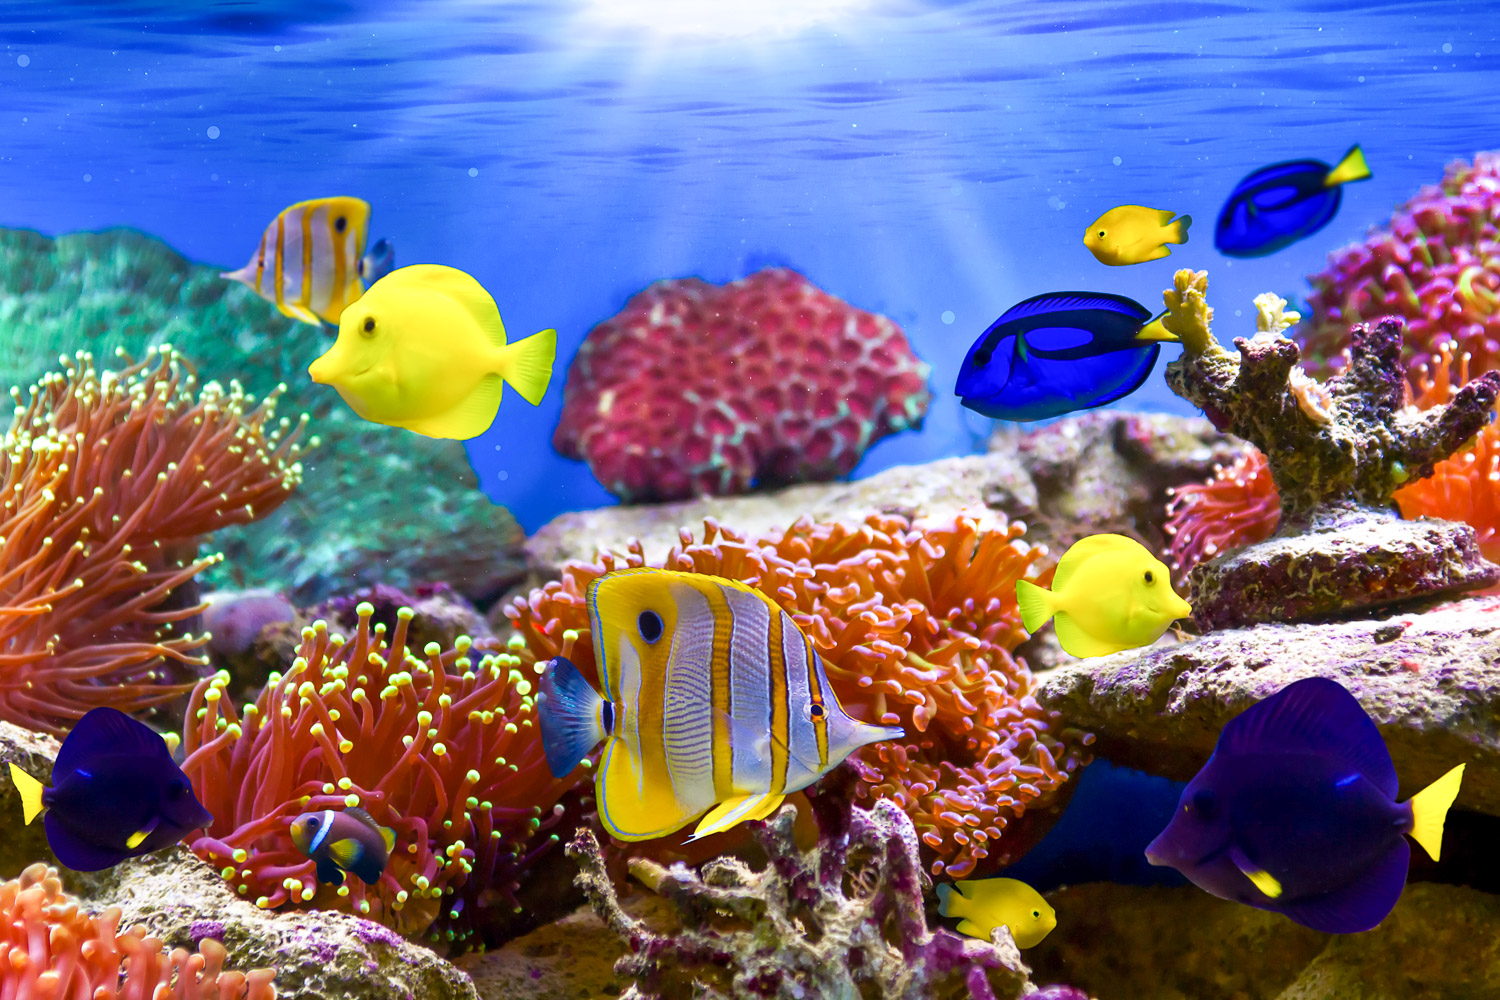 Tropical fish on a coral reef in a tank - the Cretaquarium near Heraklion is easy to combine with a visit to Knossos with kids